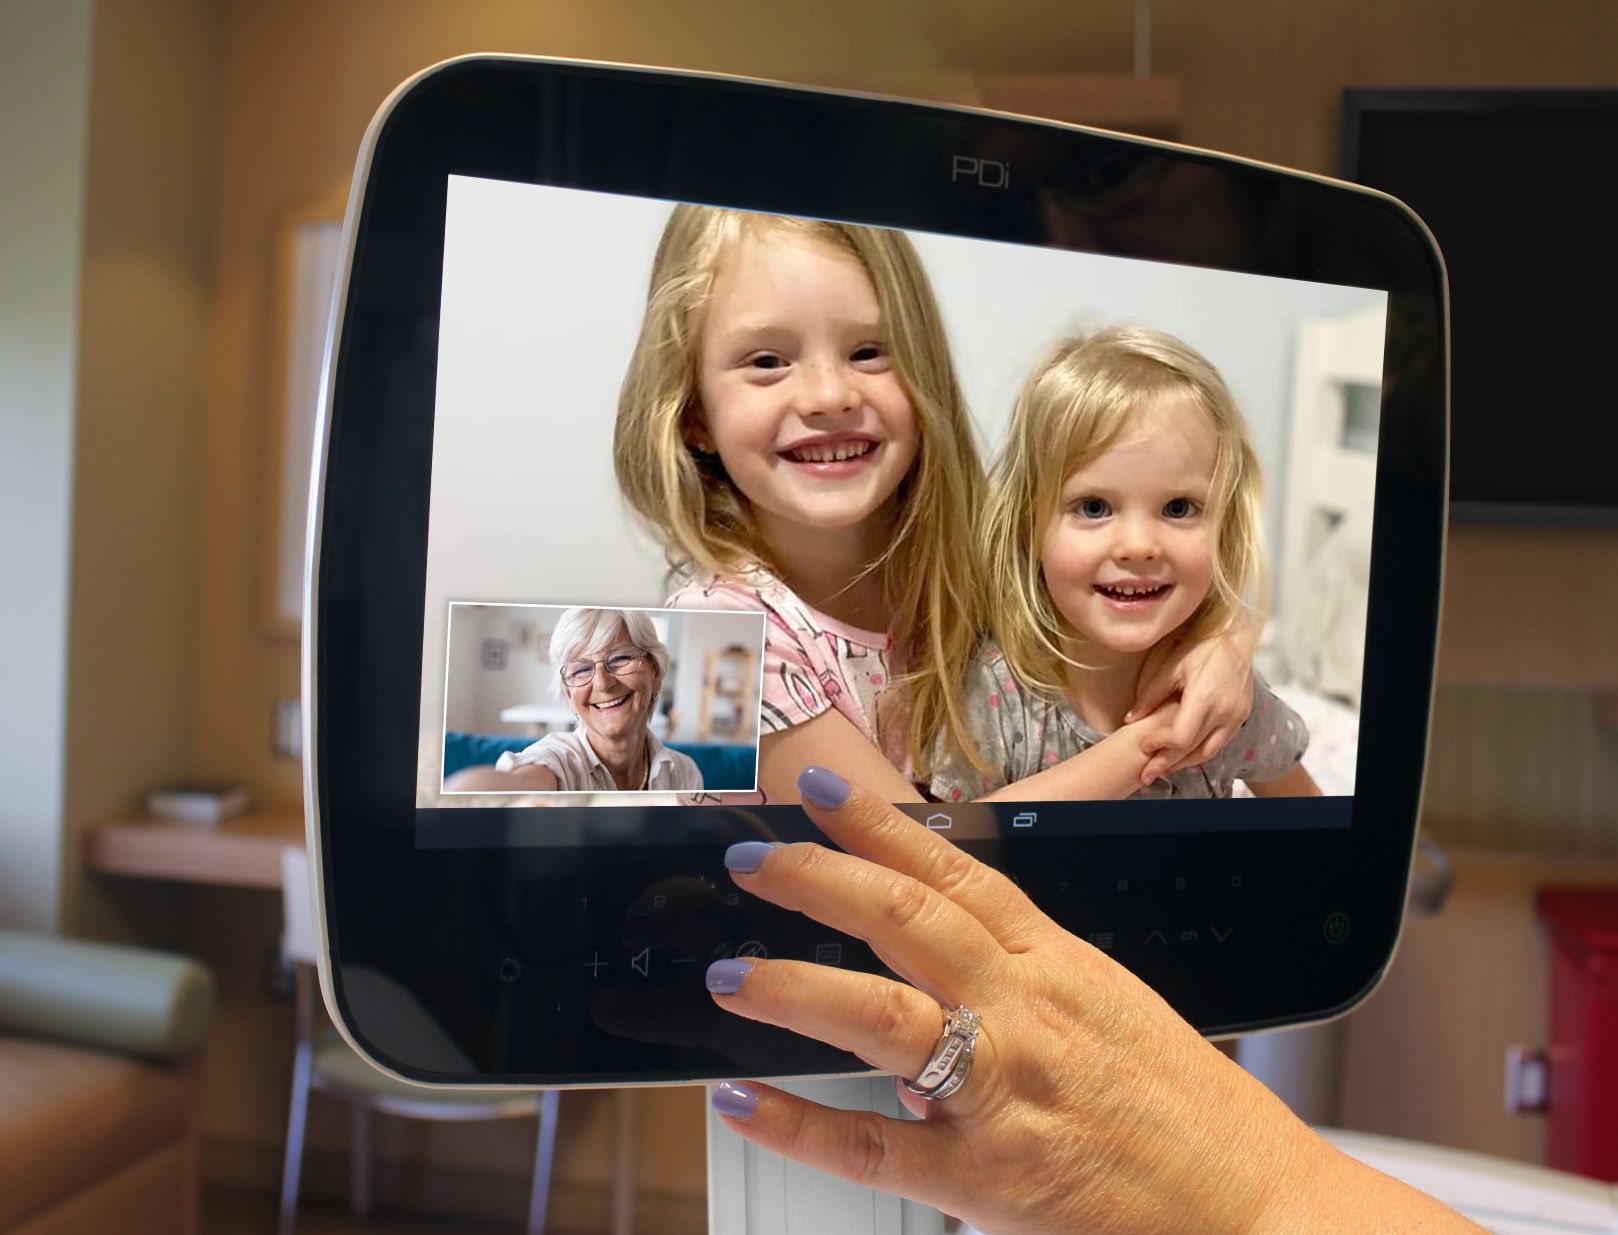 The Important Benefits of Telehealth for COVID-19 and Beyond